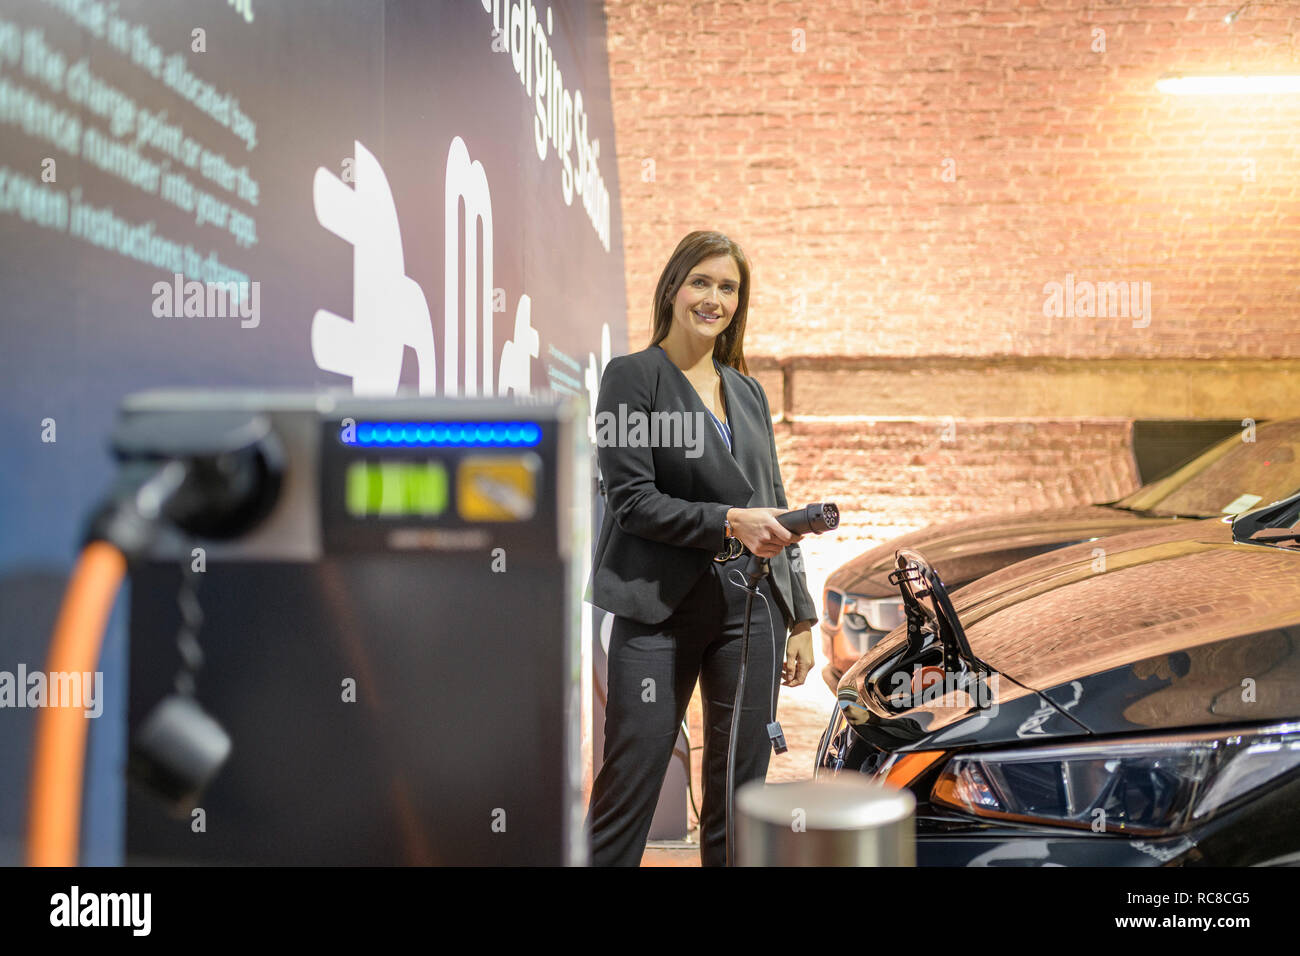 Portrait of businesswoman at electric vehicle charging station, Manchester, UK Stock Photo